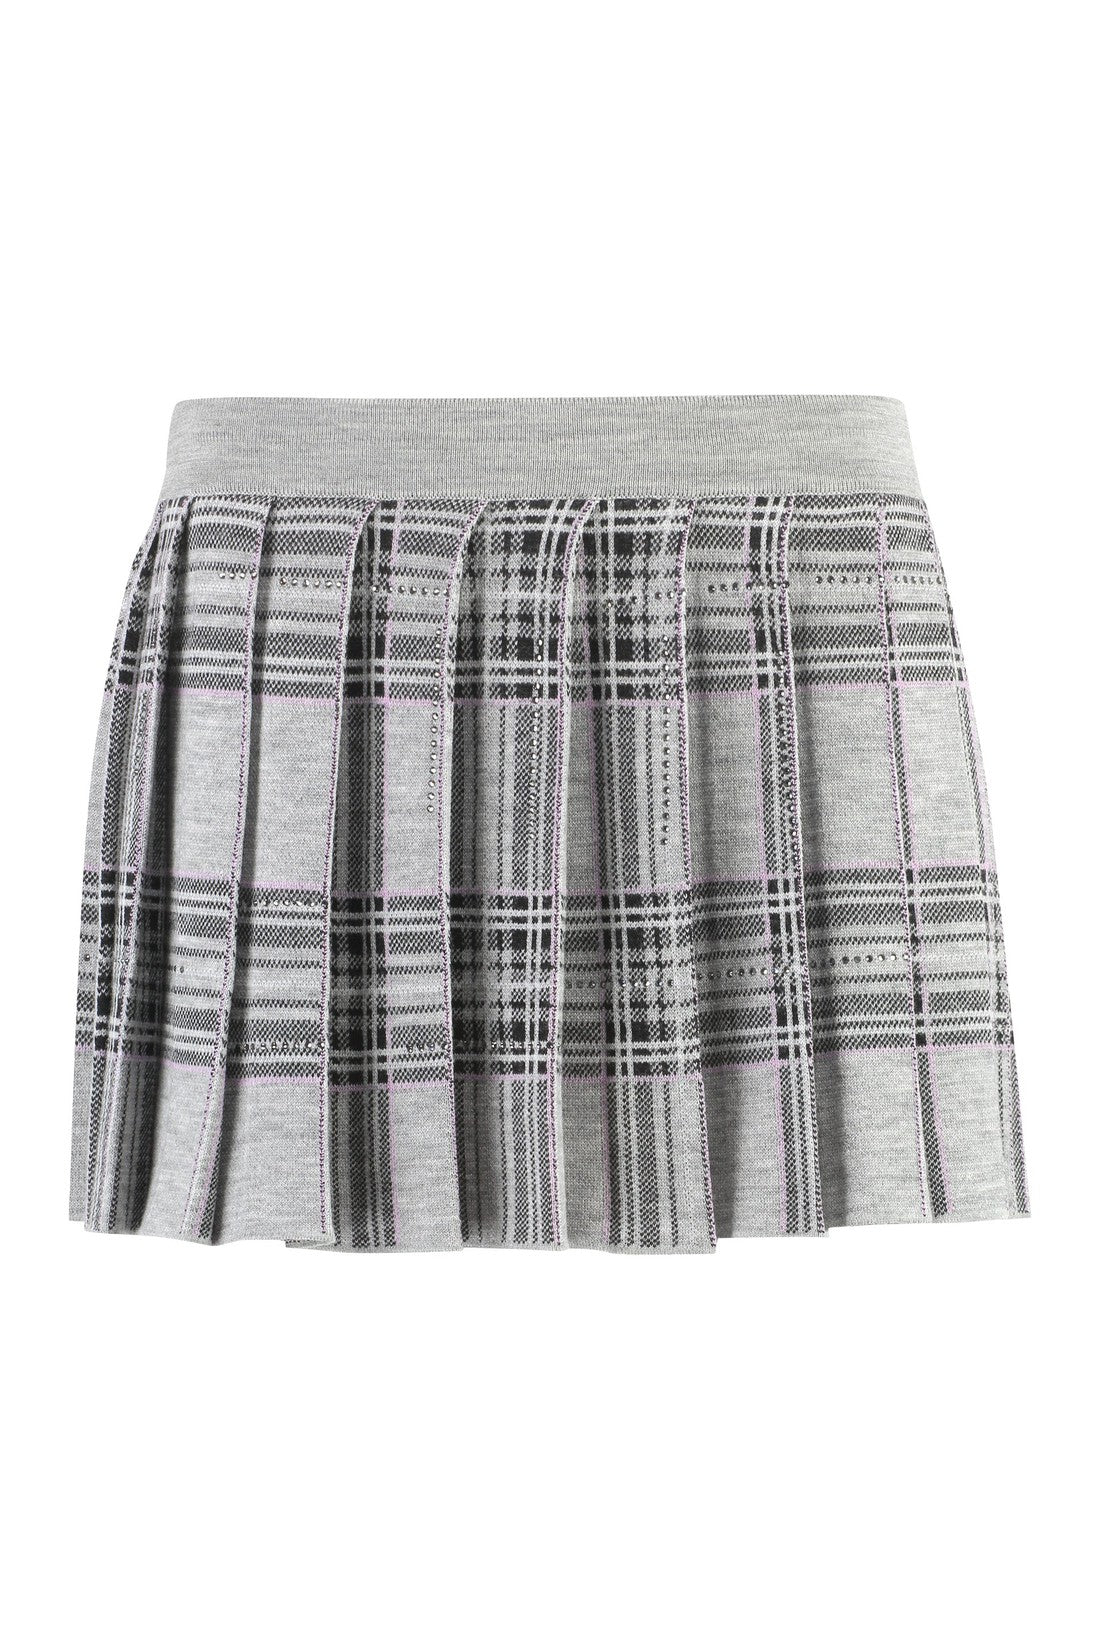 Giuseppe Di Morabito-OUTLET-SALE-Pleated knitted skirt-ARCHIVIST